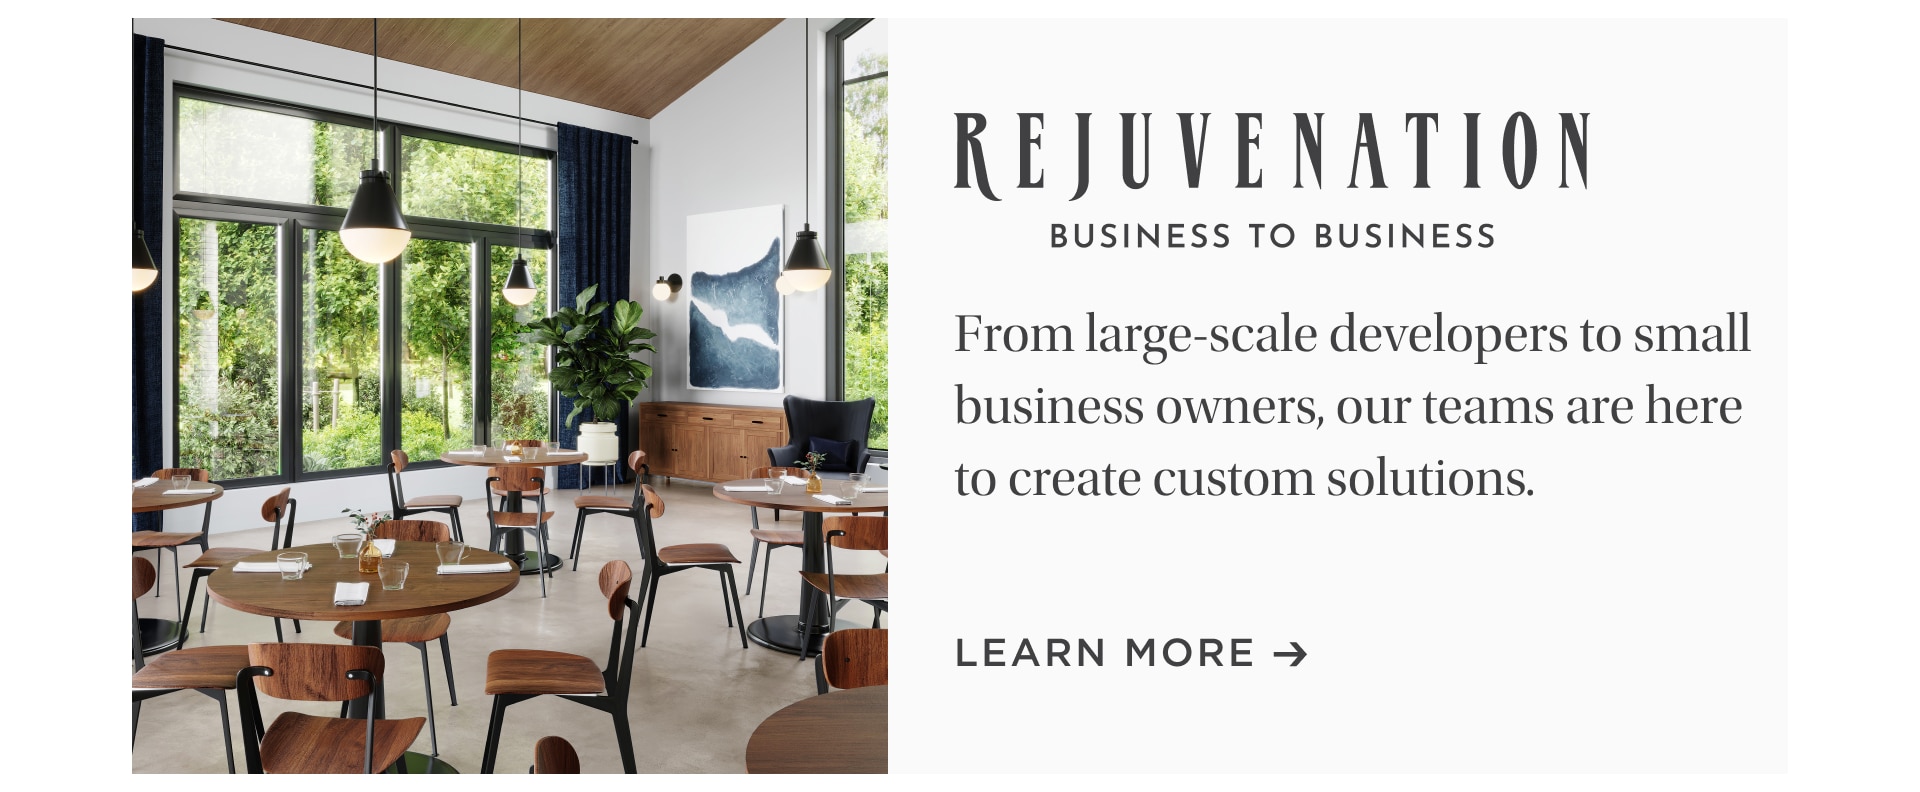 REJUVENATION - BUSINESS TO BUSINESS - LEARN MORE